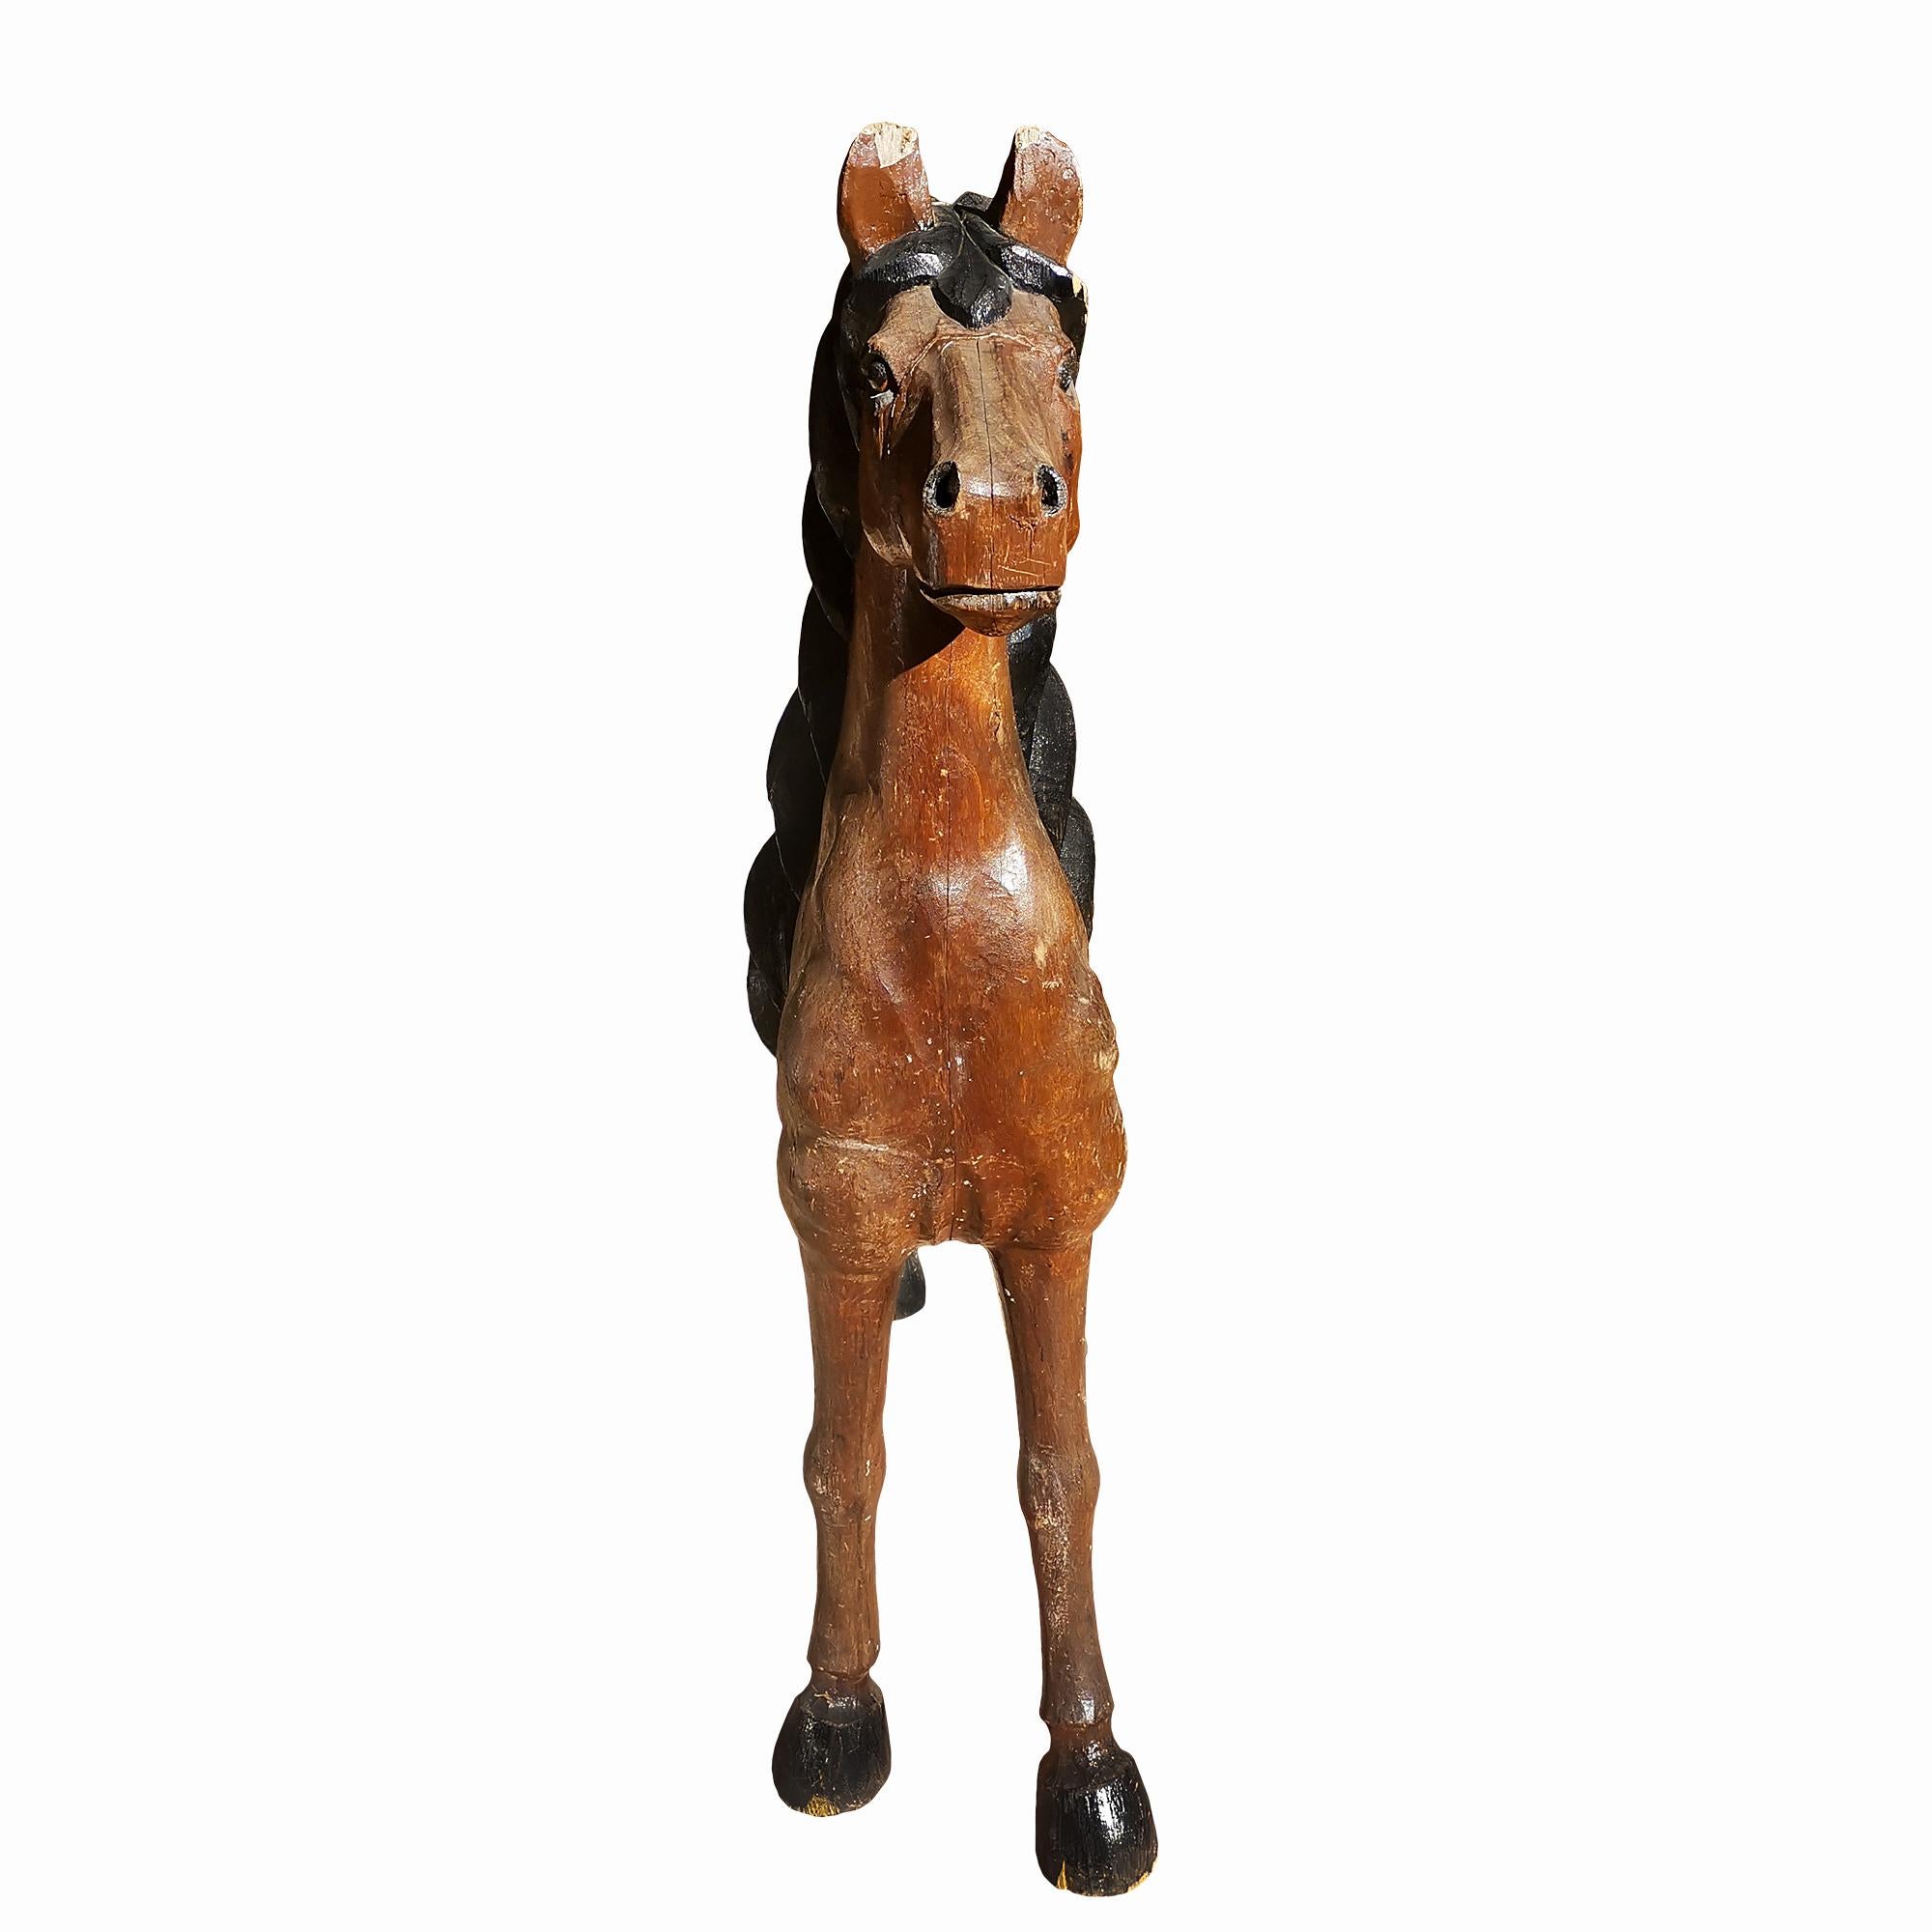 Spanish Art Deco Solid Oak Horse In Brown and Black Colour - Spain 1920 For Sale